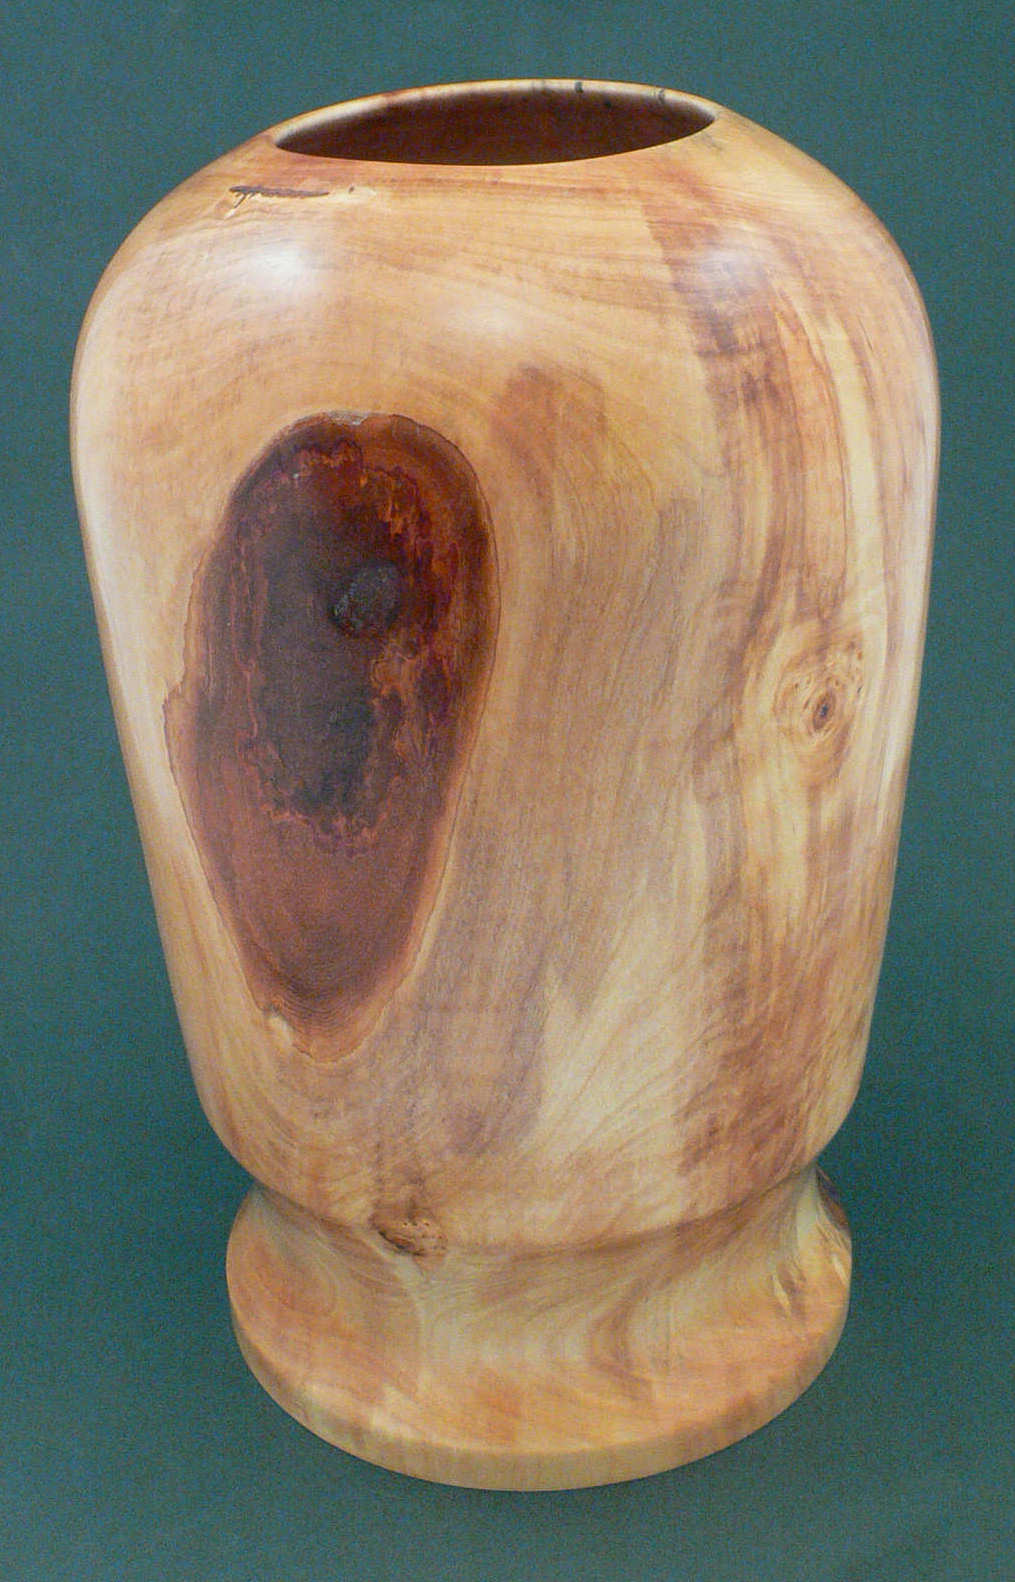 Wood art by Chris Rymer of Inside Out Wood Art made from - Sycamore